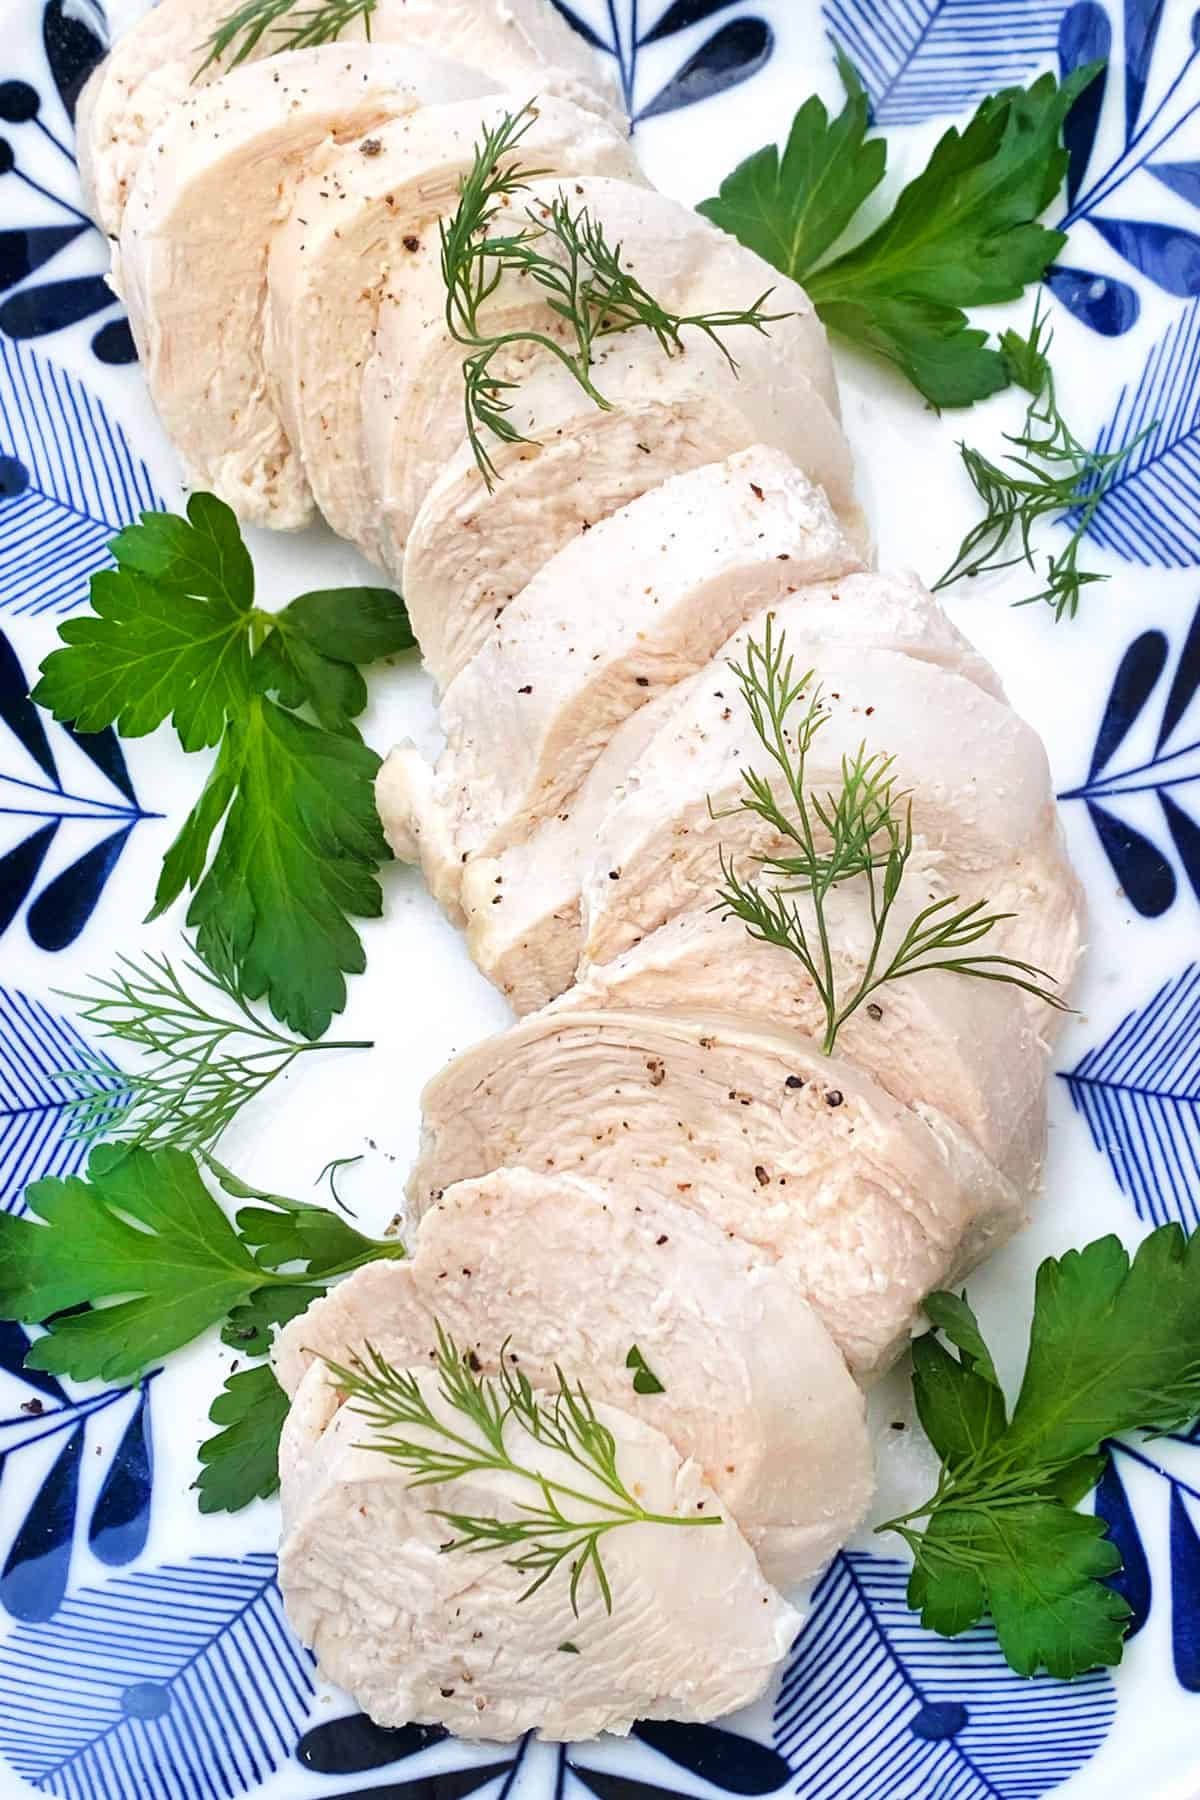 Close up of 5 slices of poached chicken on a blue and white plate, topped with some delicate sprigs of dill and parsley leaves